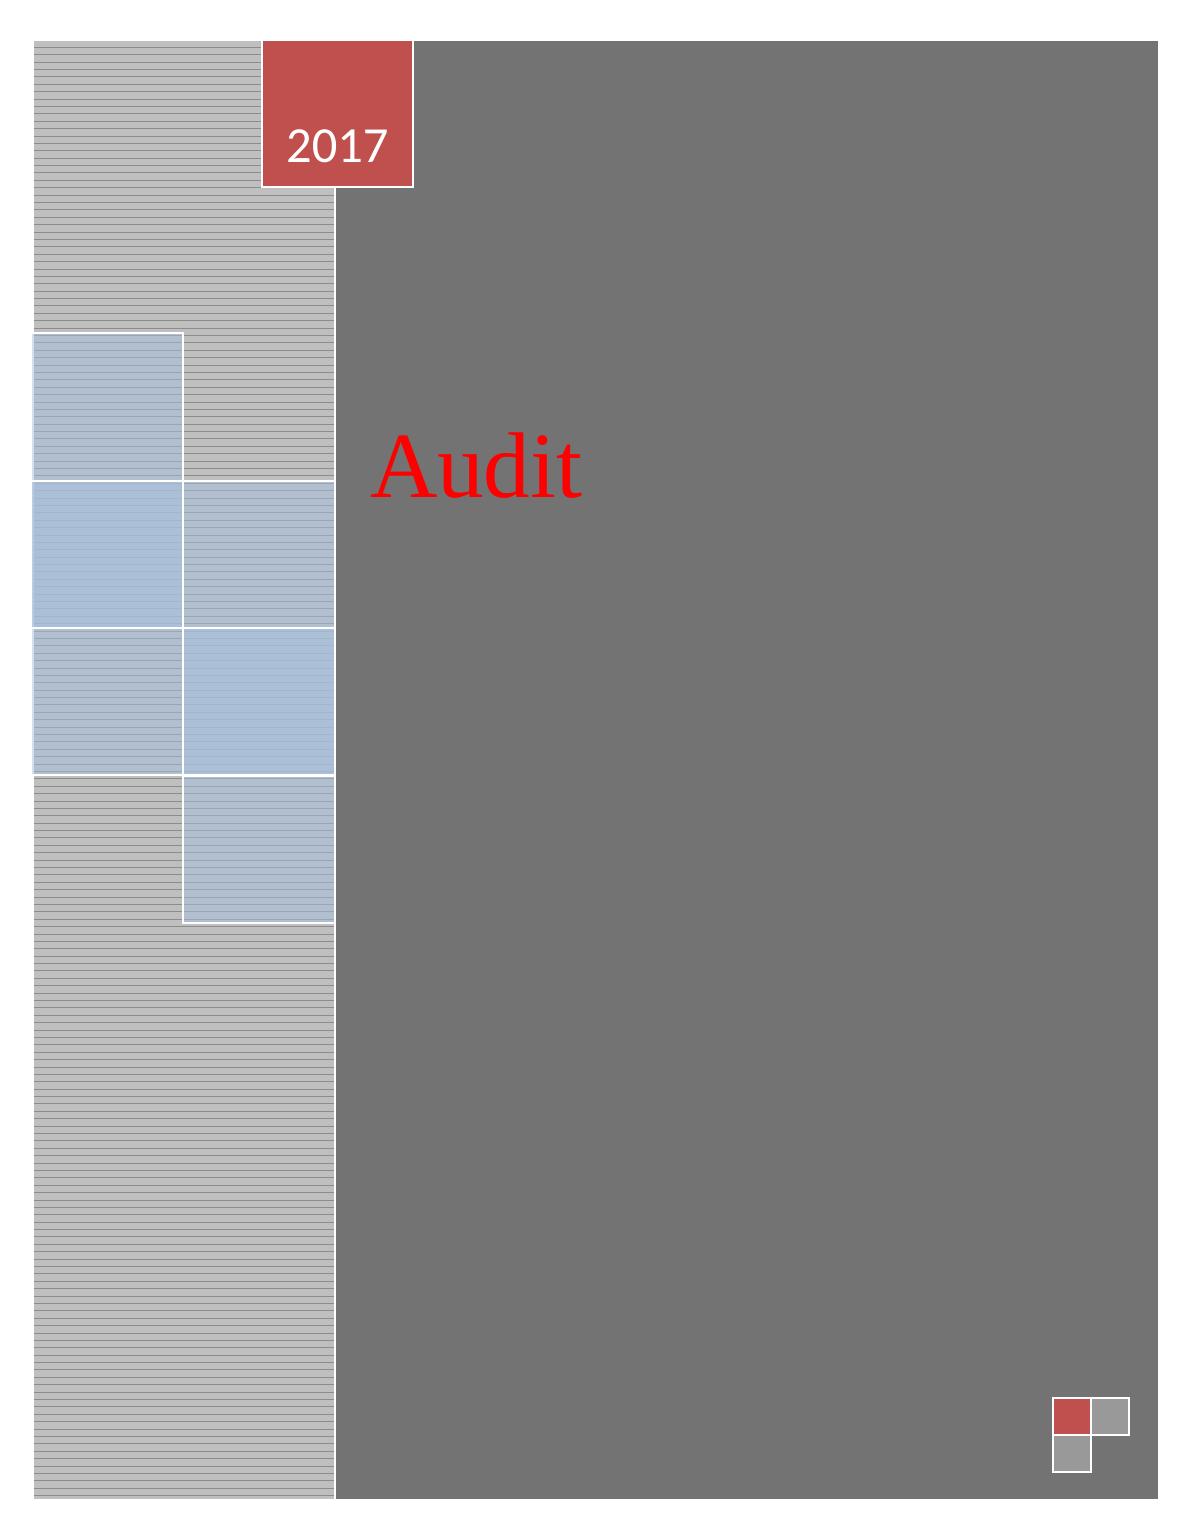 Sample Assignment on Audit_1